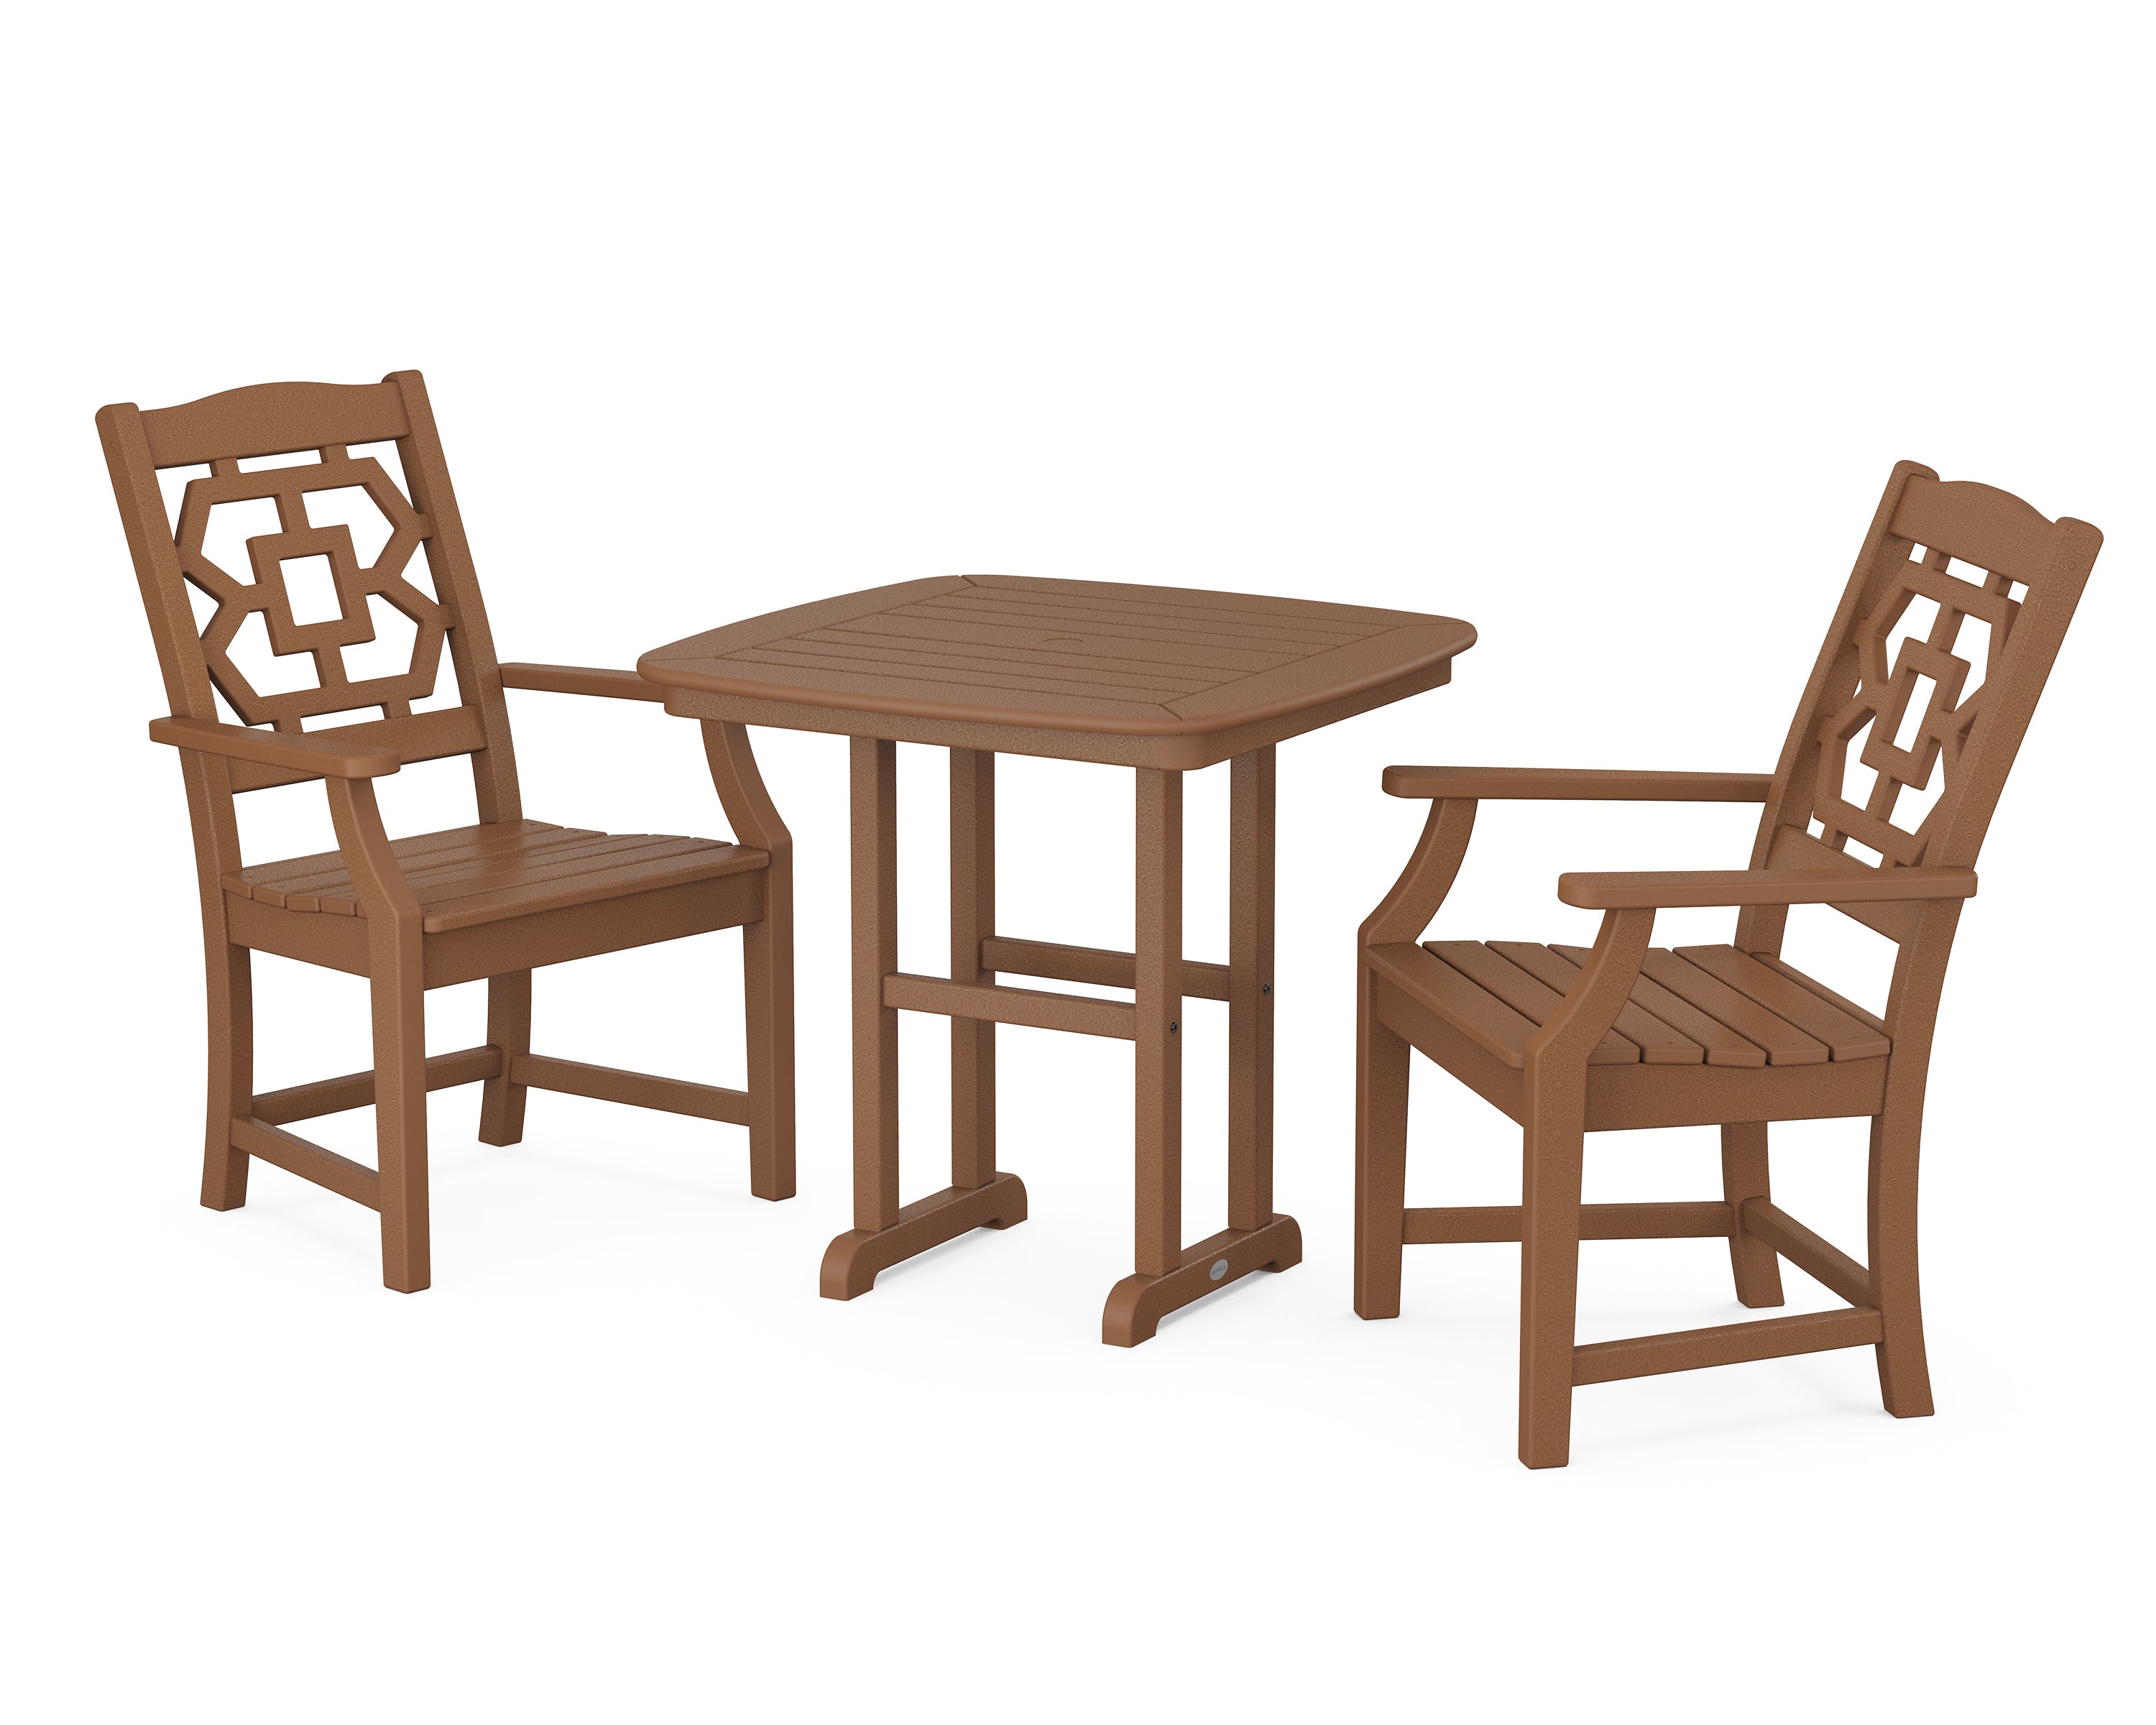 Martha Stewart by POLYWOOD® Chinoiserie 3-Piece Dining Set in Teak